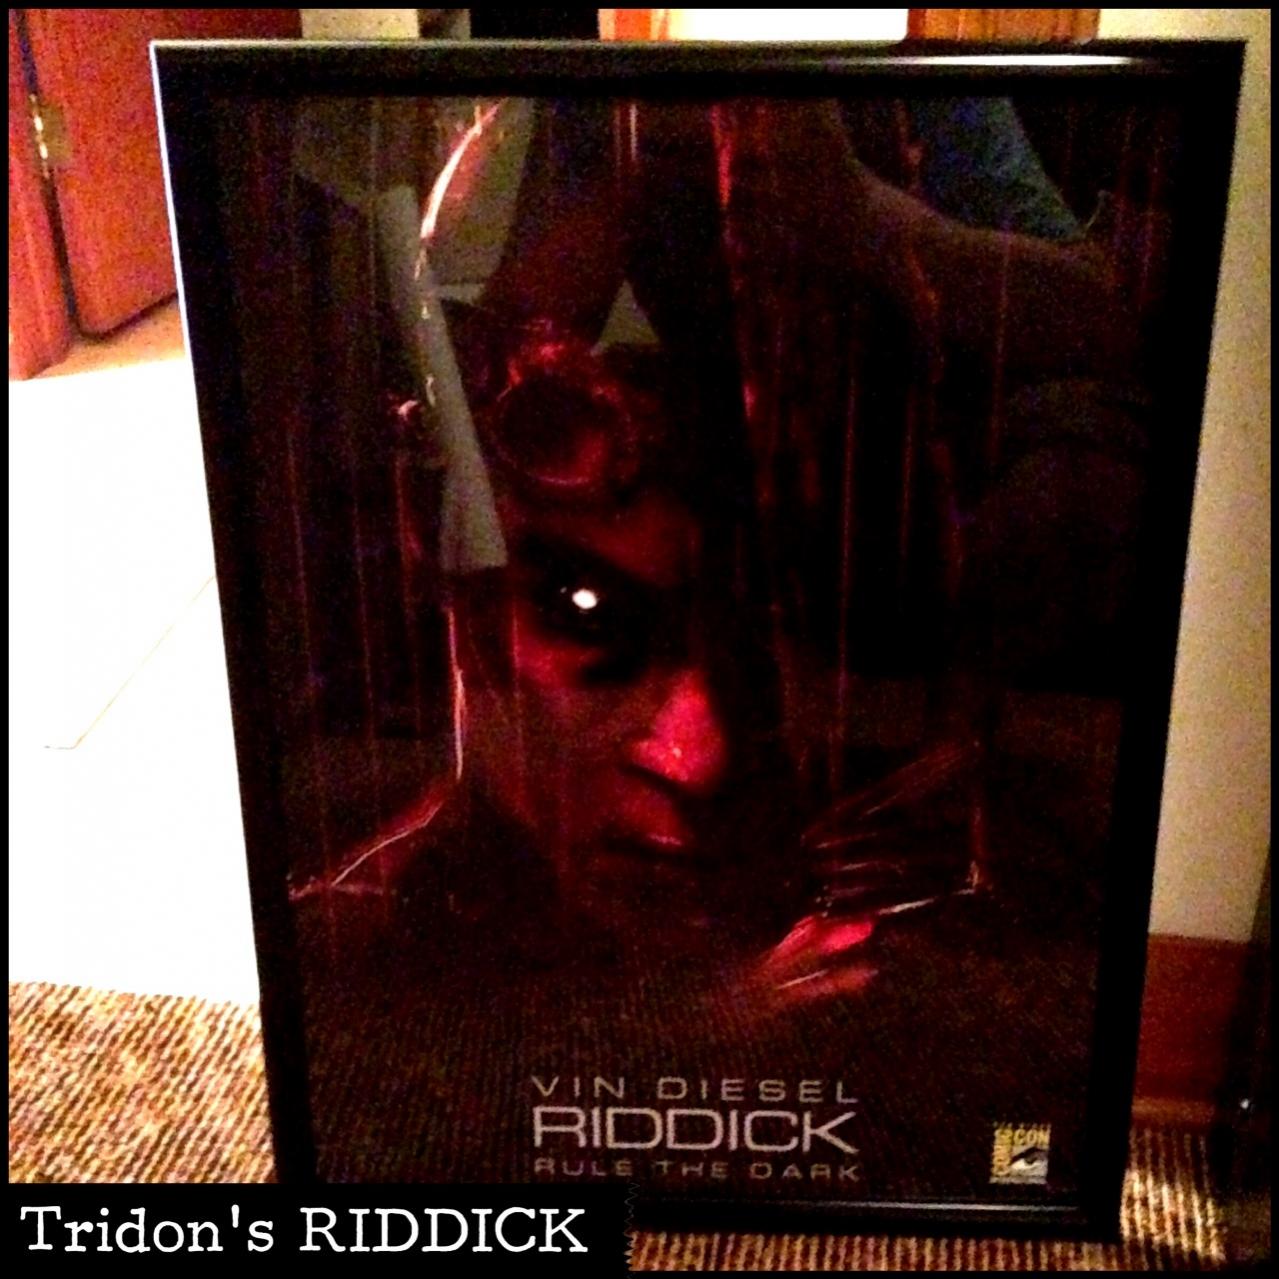 San Diego Comic-Con 2013 exclusive Riddick print (framed).